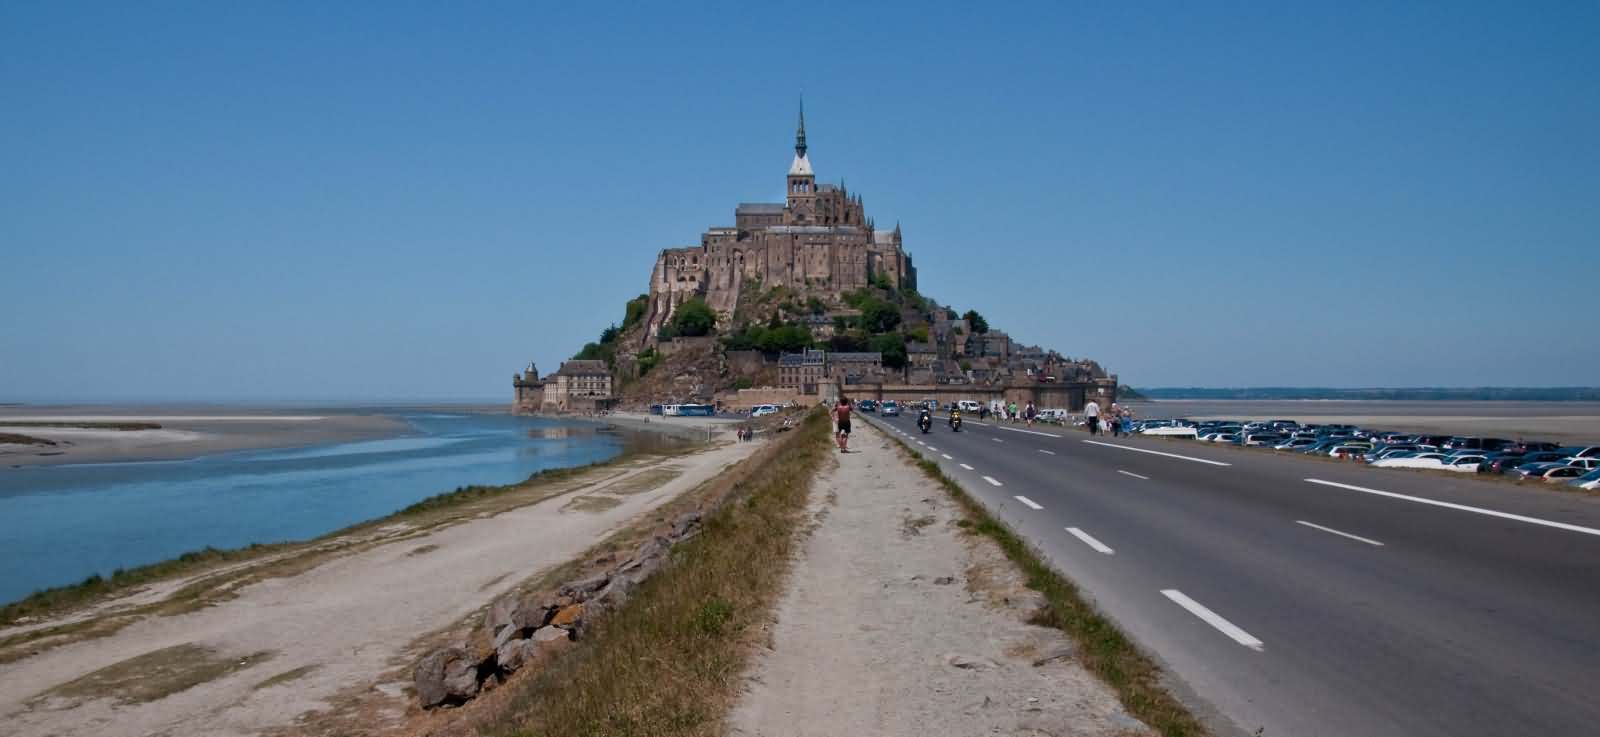 Mont Saint-Michel viewed from the causeway